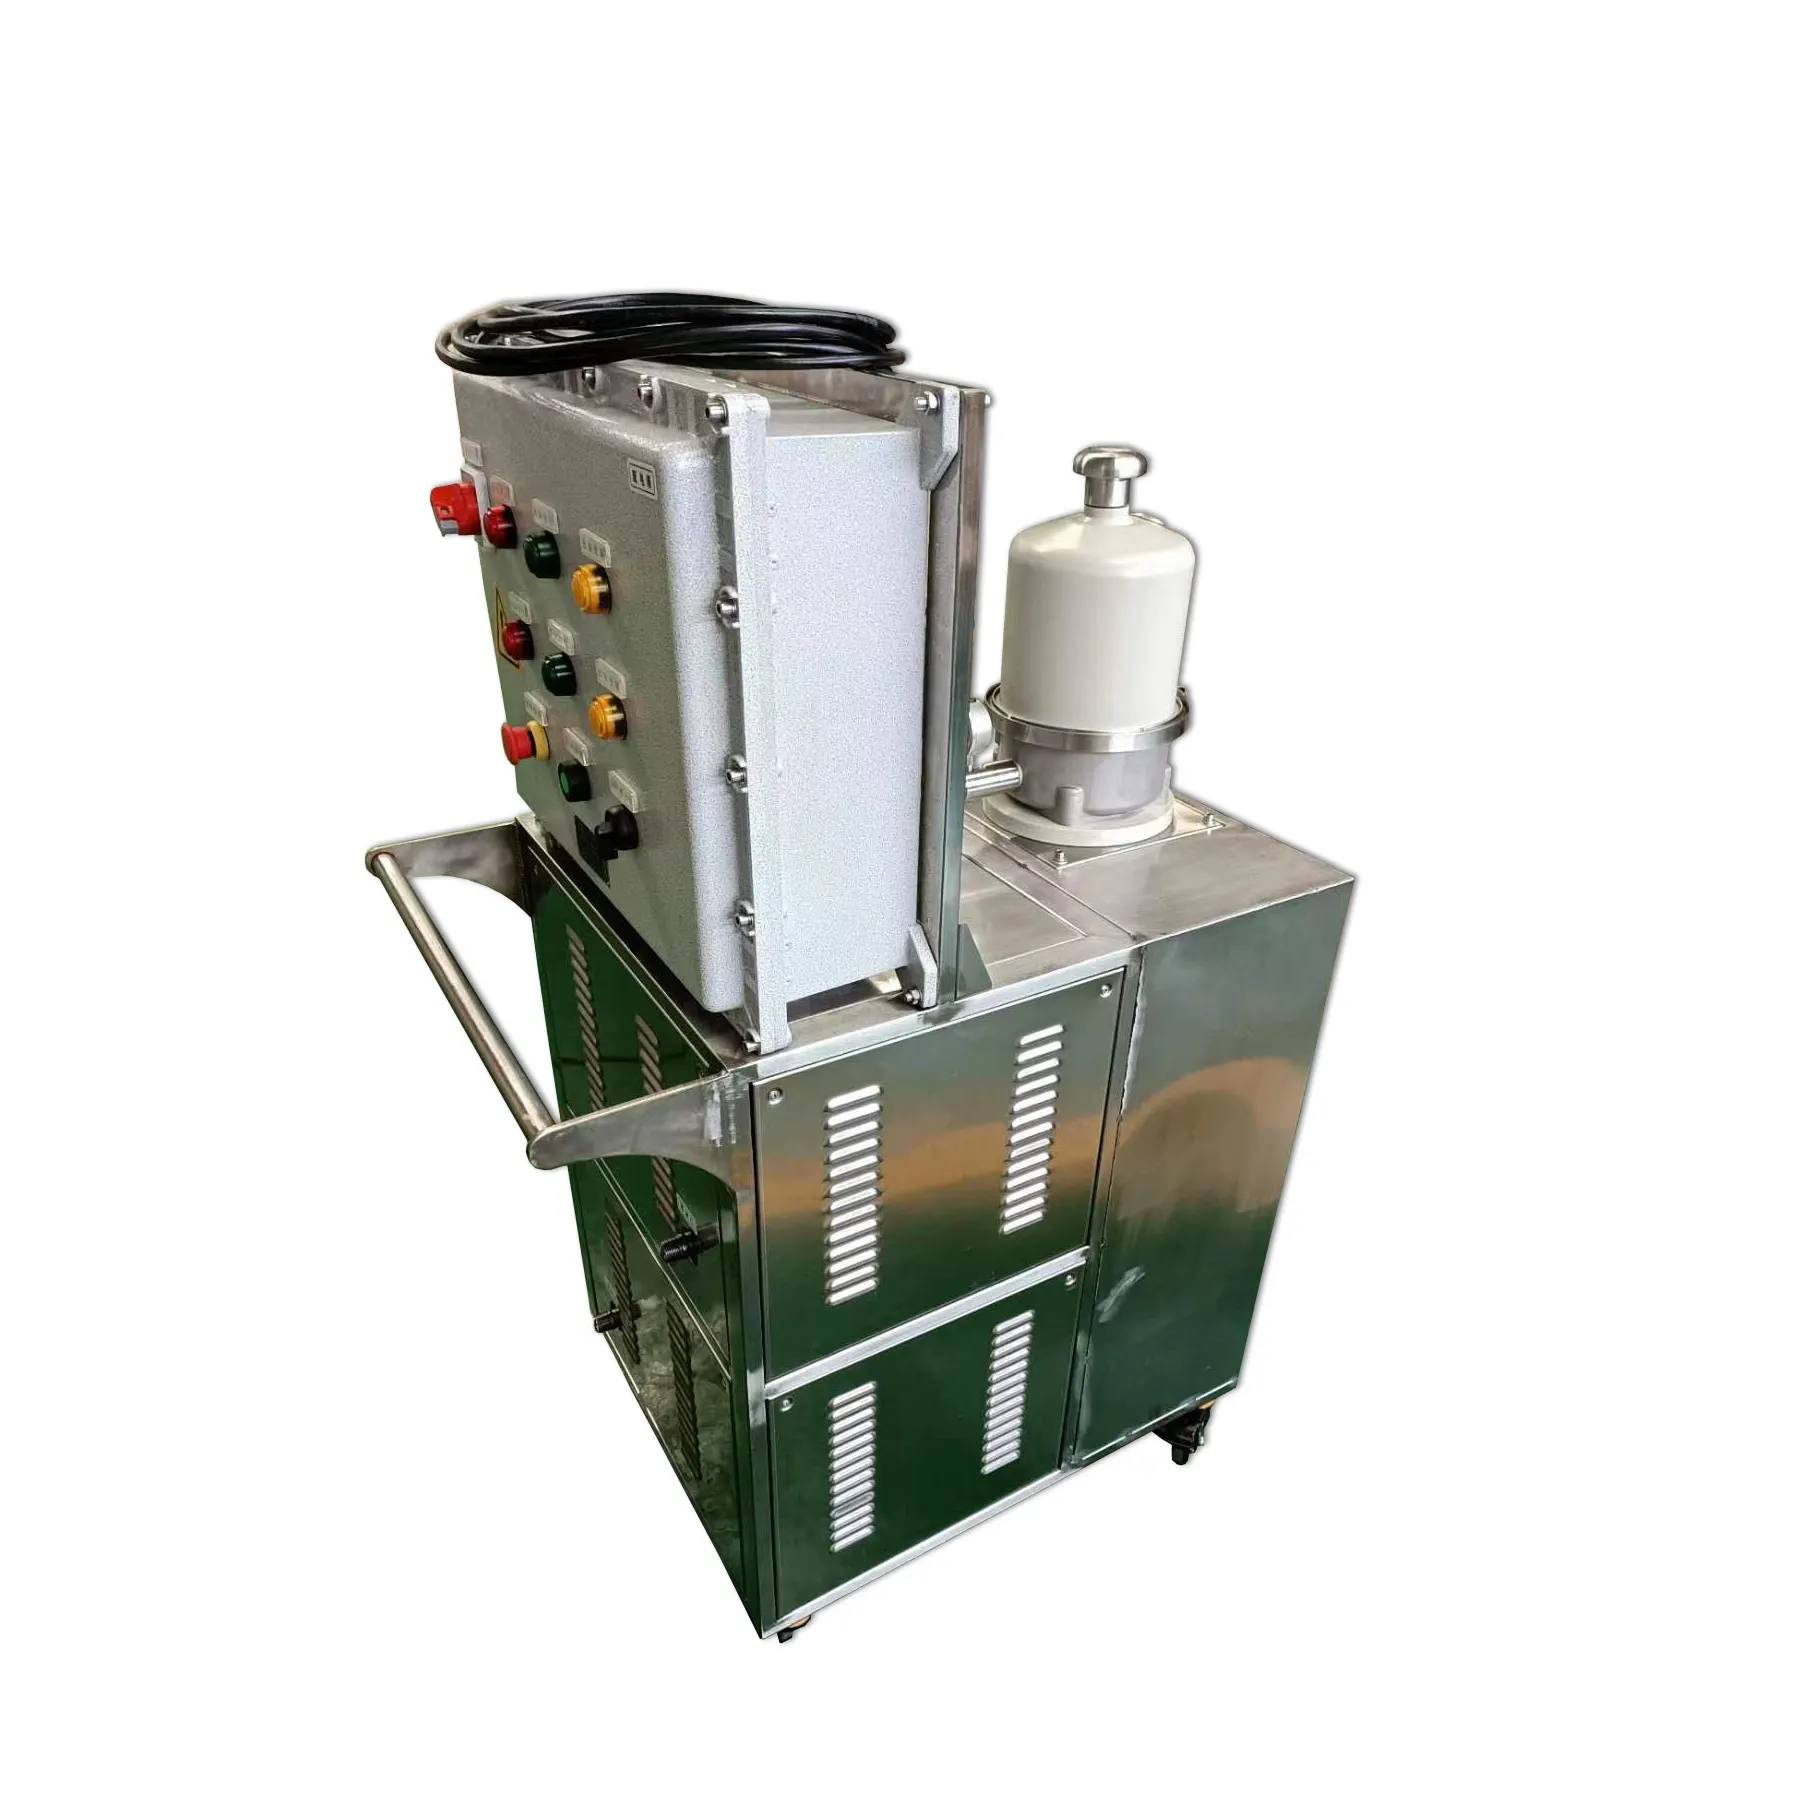 Explosion-proof oil filtration systems